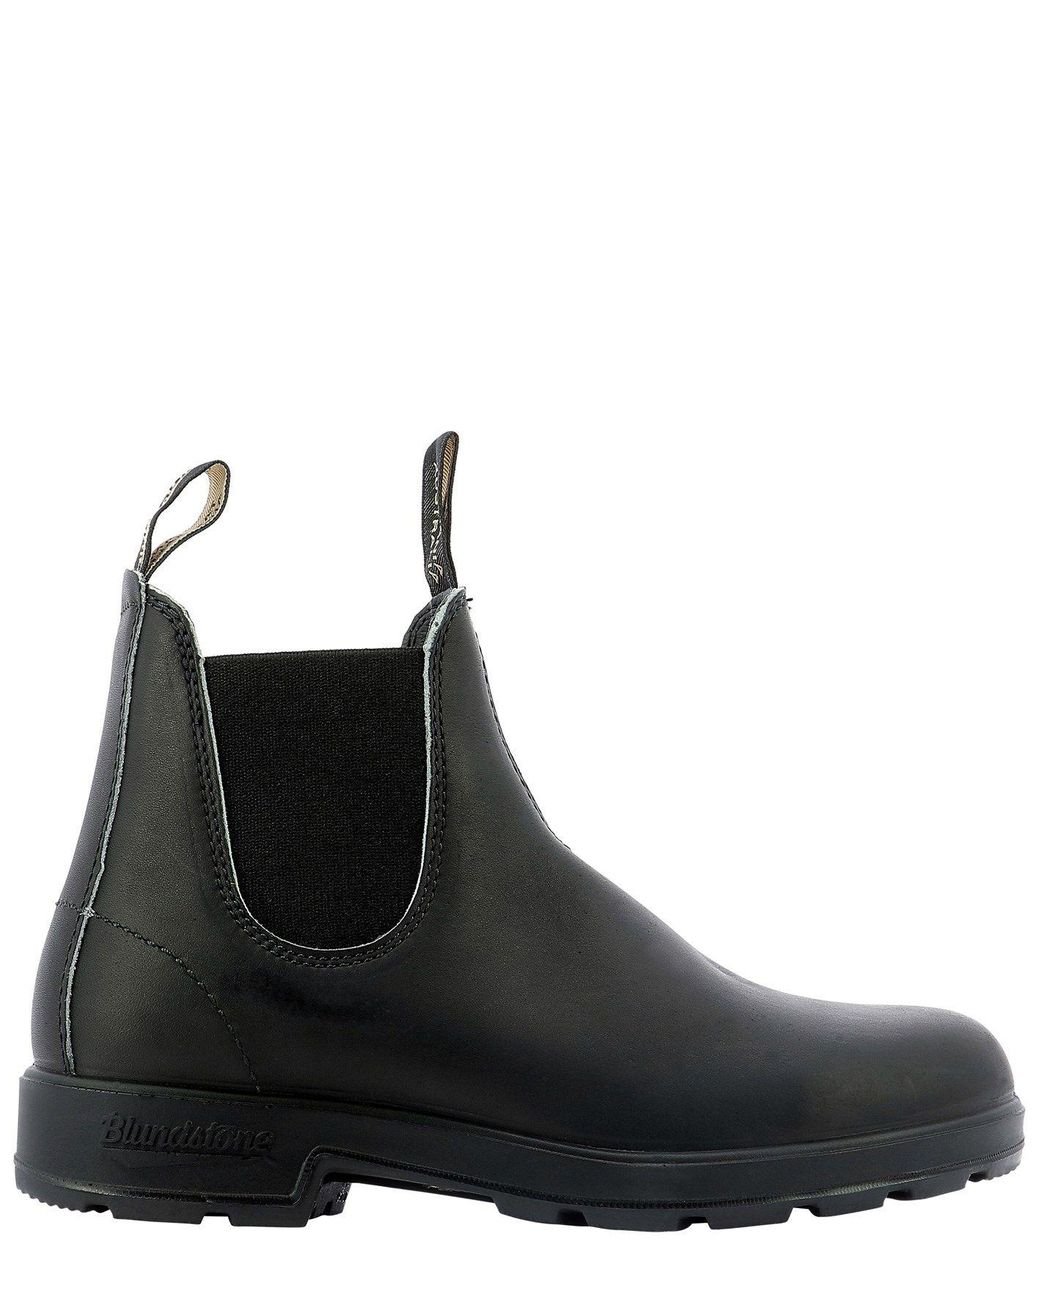 Blundstone 510 Leather Ankle Boots in Black - Lyst